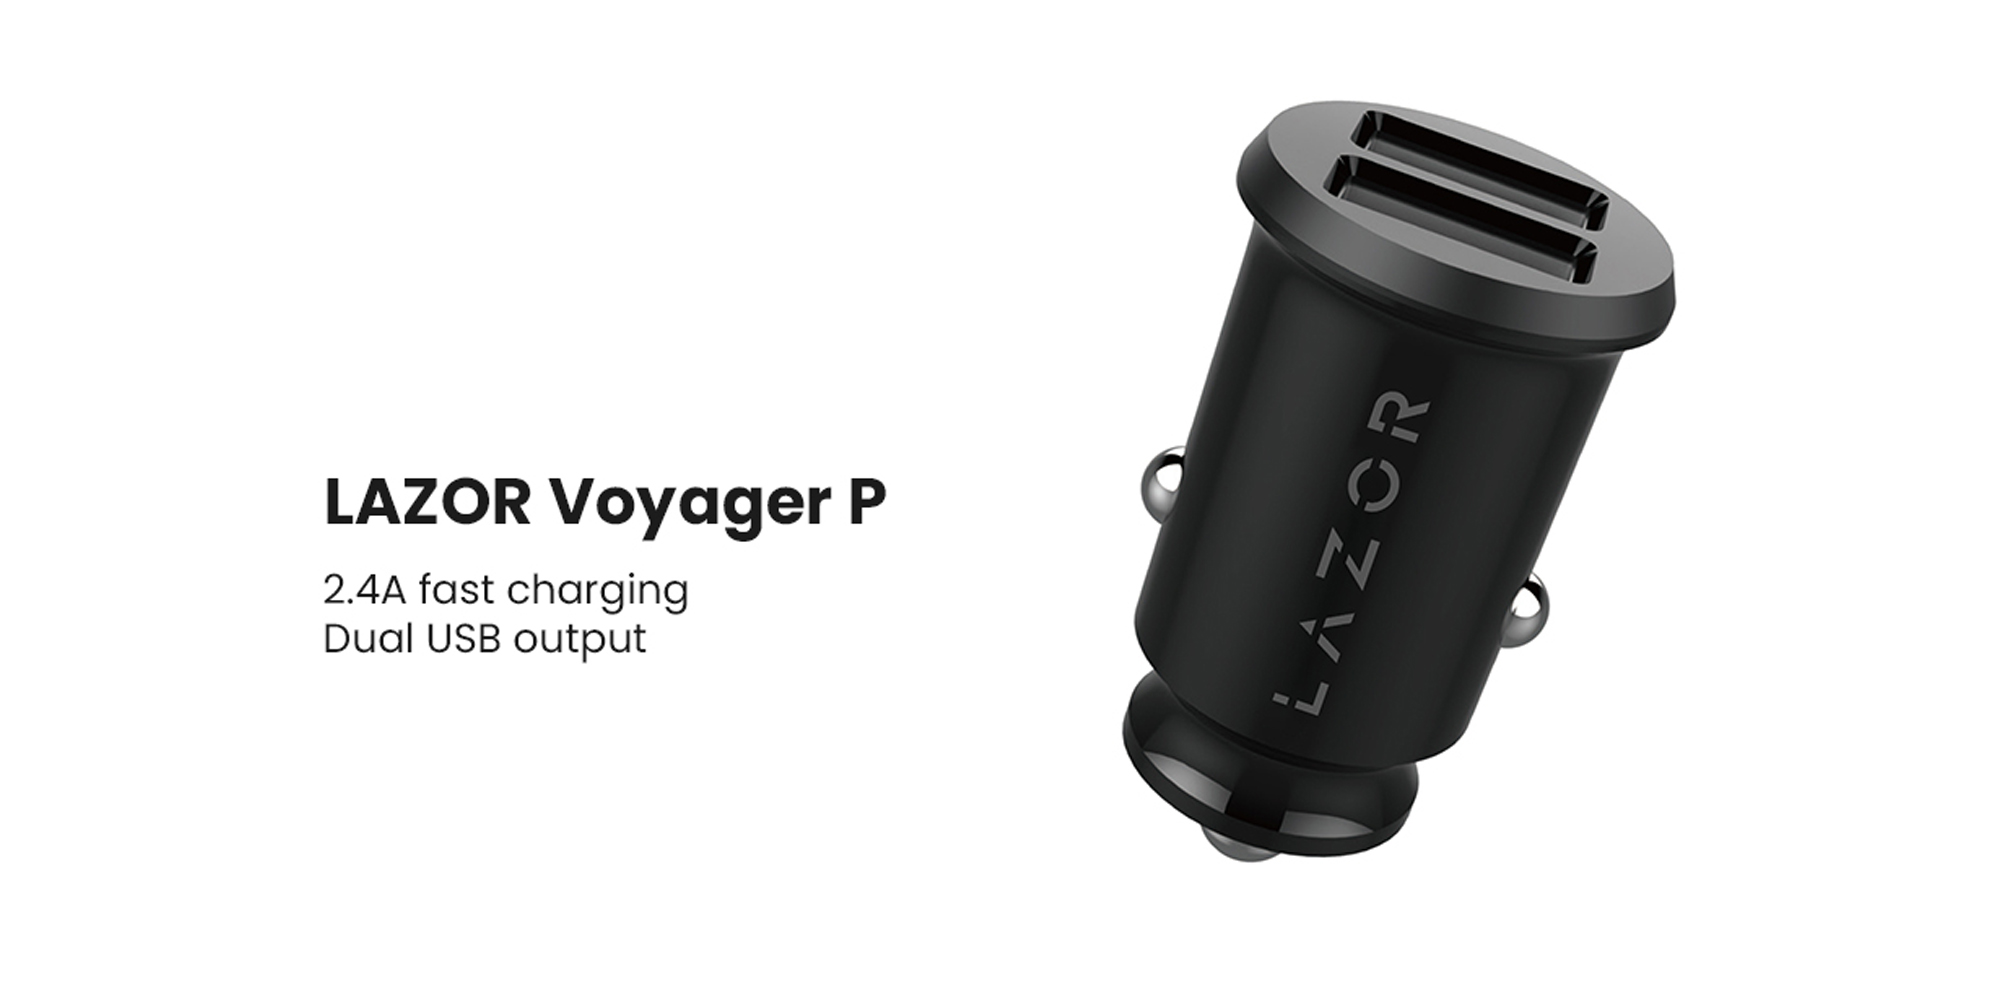 LAZOR Voyager P CC13: Compact Car Charger with 1M Lightning Cable, Carbon Fiber Texture, Dual USB Output, Multi-Protection - Black